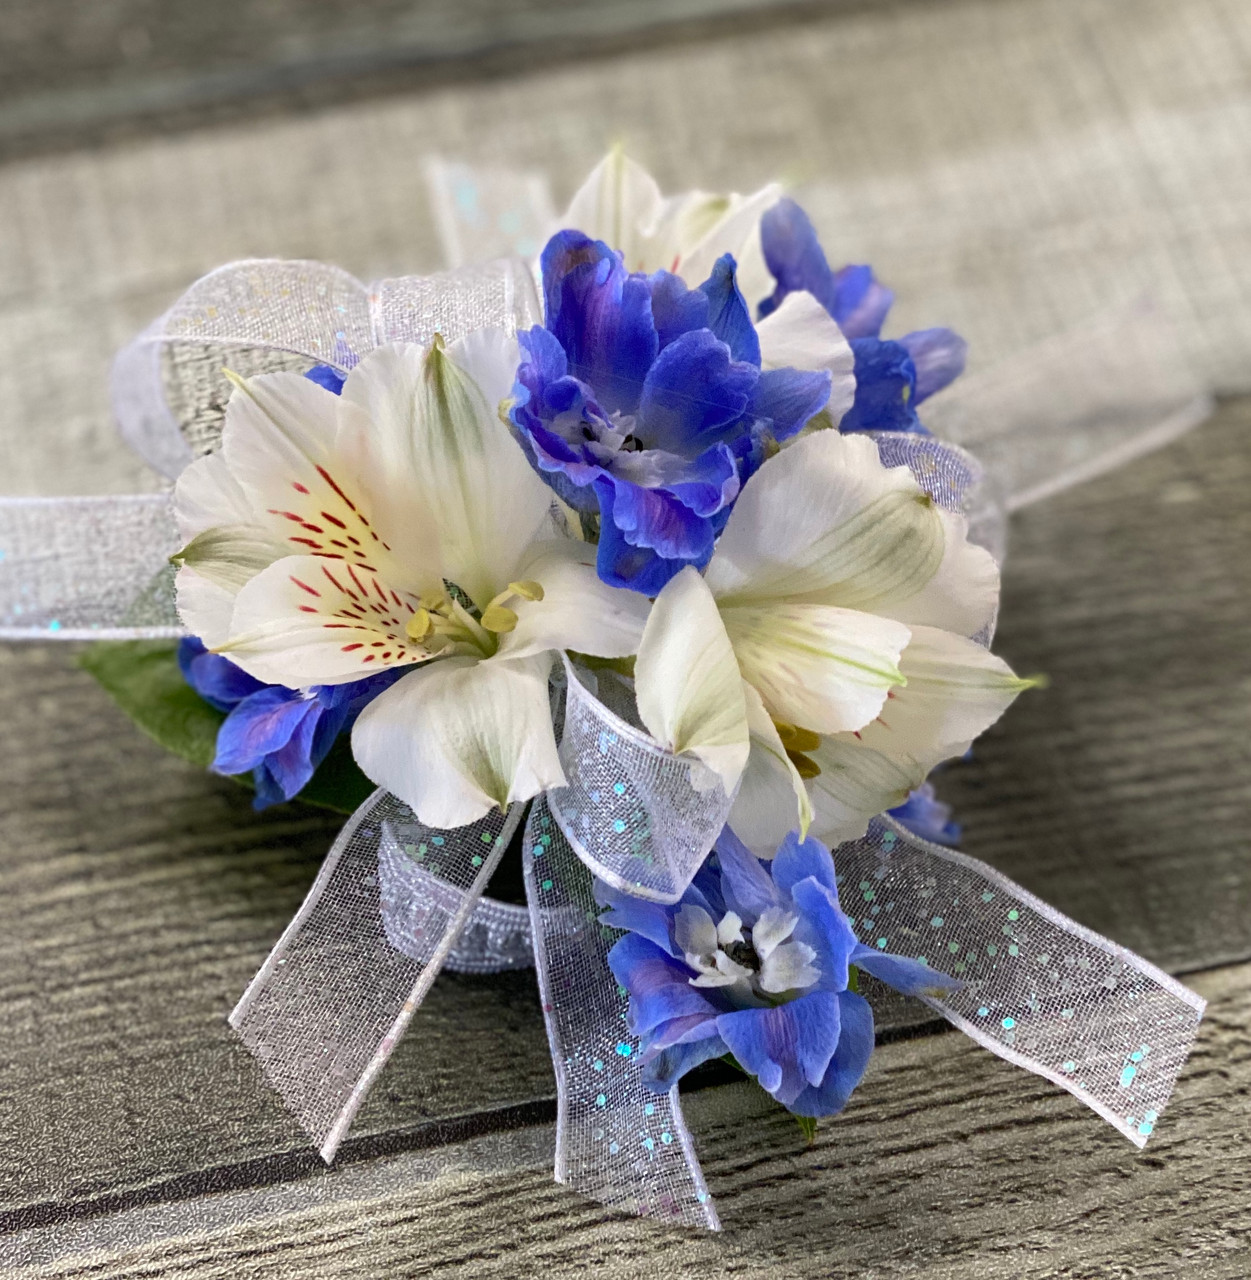 Blue & White Wrist Corsage - Belvedere Flowers of Havertown PA